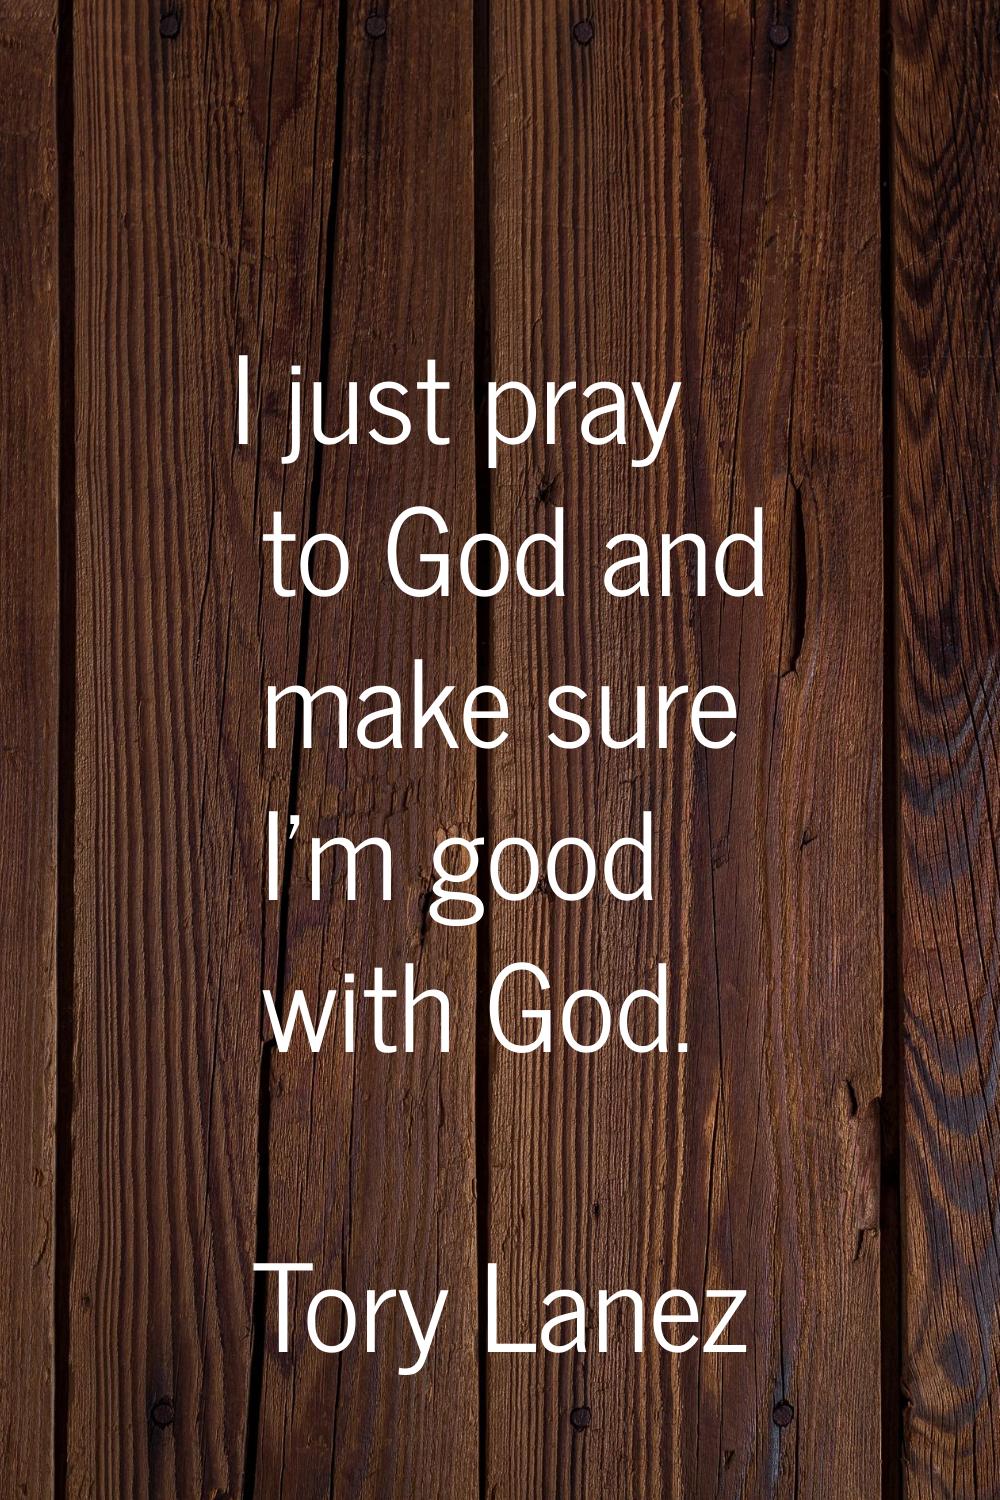 I just pray to God and make sure I'm good with God.